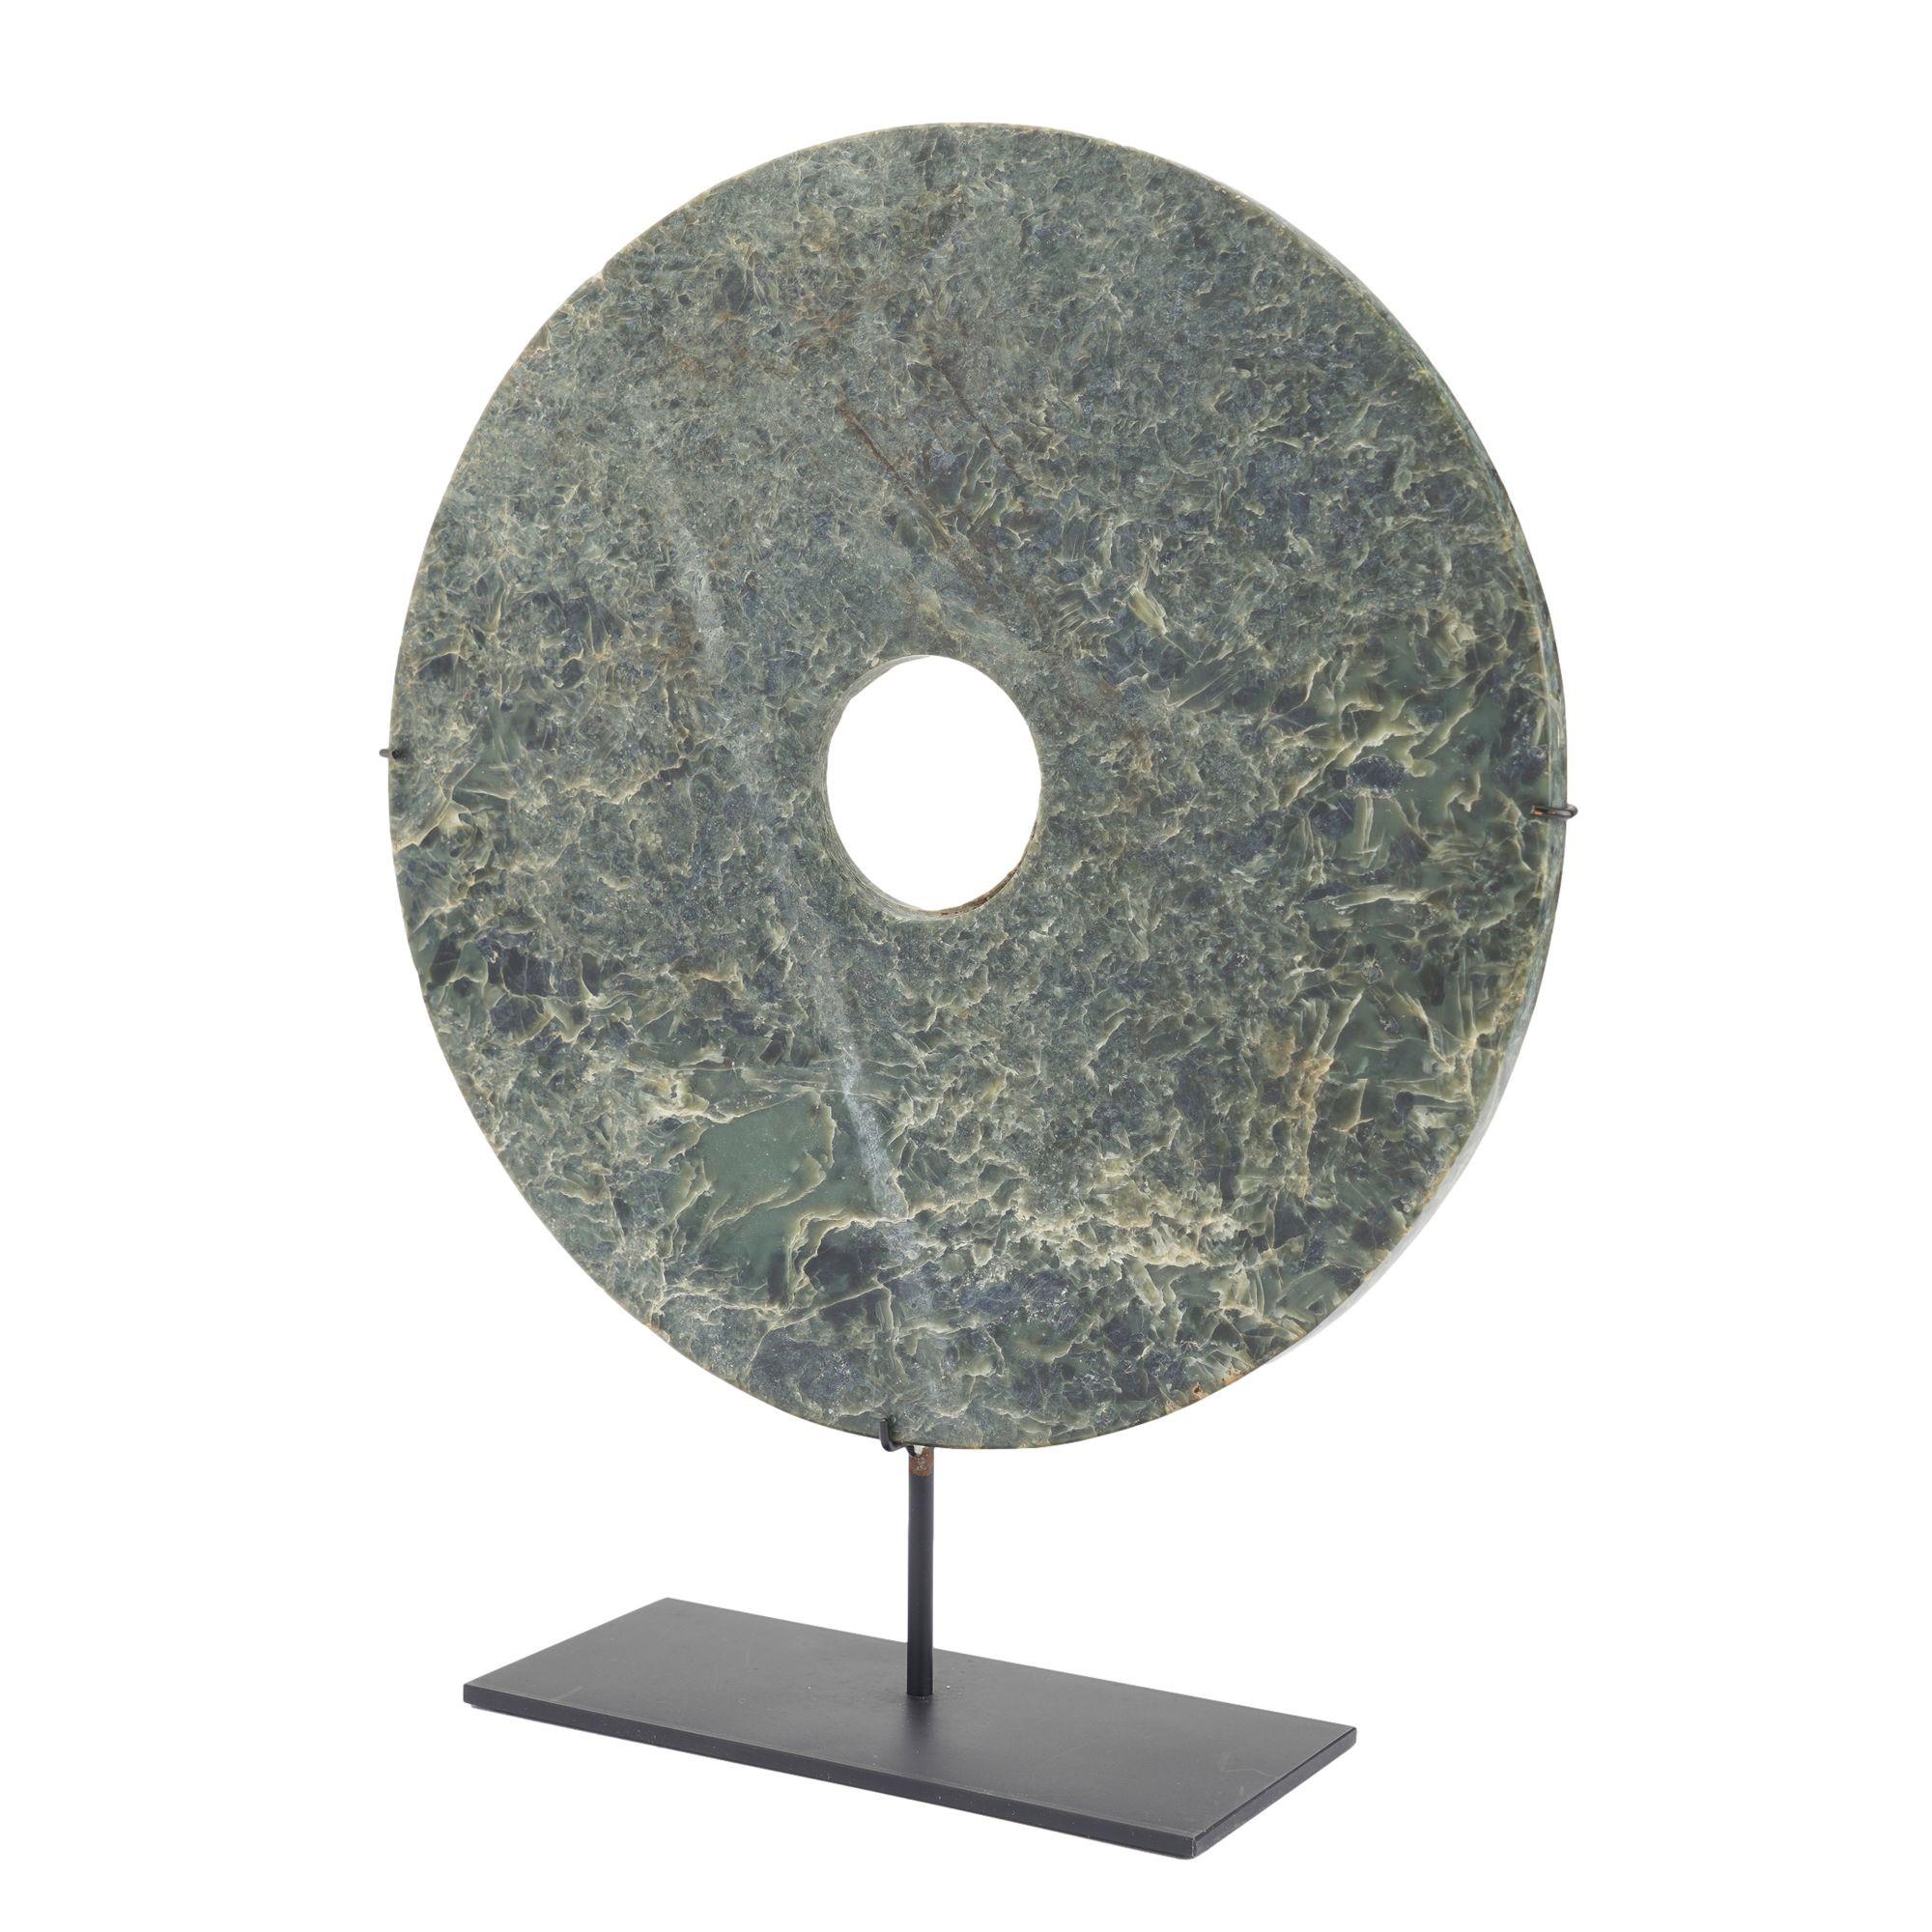 Circular carved jade bi disc mounted on a custom stand. The marble is rich with blue, green, tan, and brown tones and has deep visual depth. In China, the Bi is a symbol of moral character and social rank, used ceremonially to designate a person's